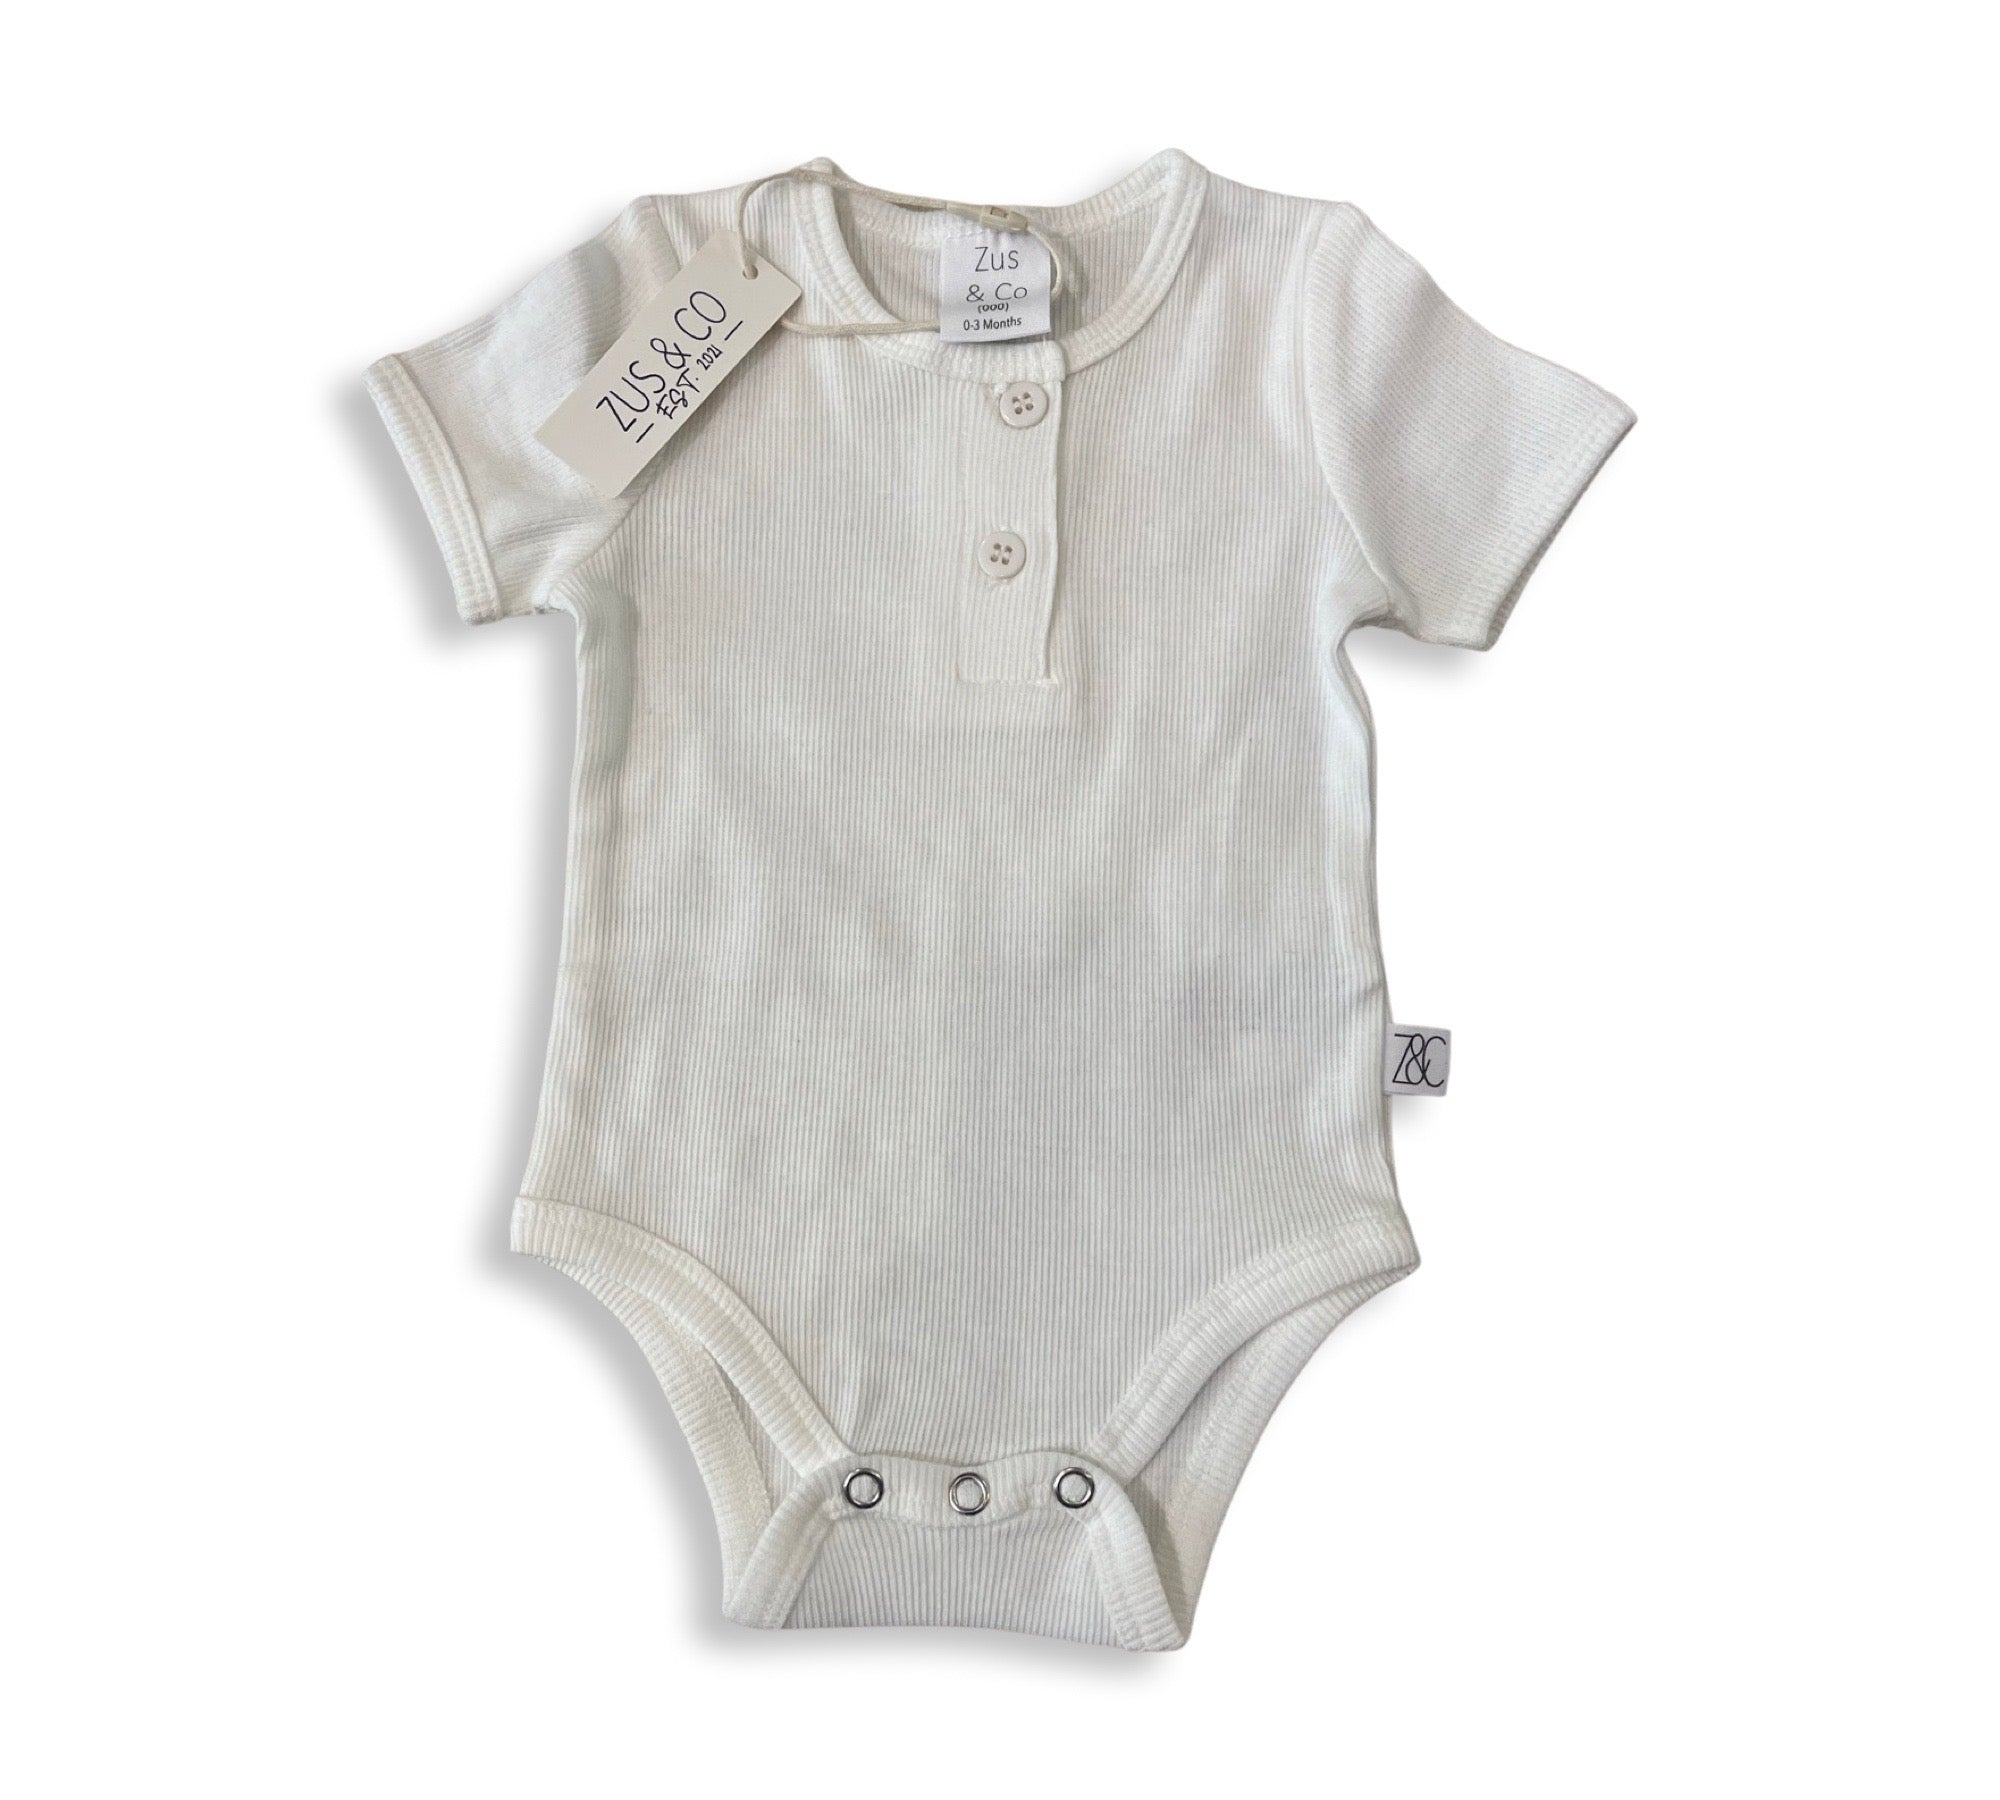 New Arrival baby bodysuit laid flat on a neutral background, accompanied by merino knit booties from giftbox co.